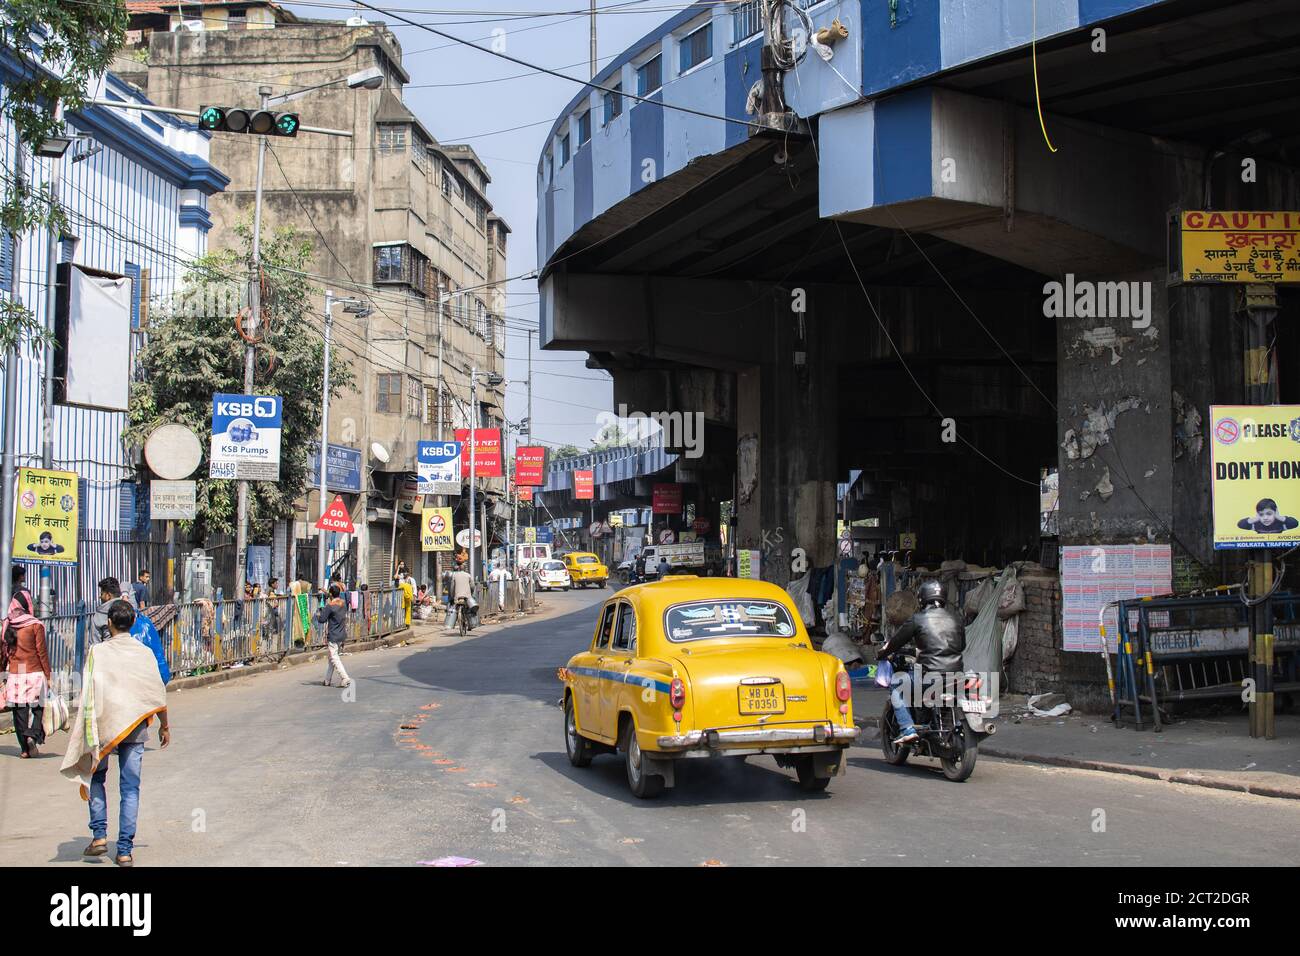 Kolkata, India - February 1, 2020: Unidentified people walks on the street as a traditional yellow taxi and motorbike drives by underneath Maa Flyover Stock Photo